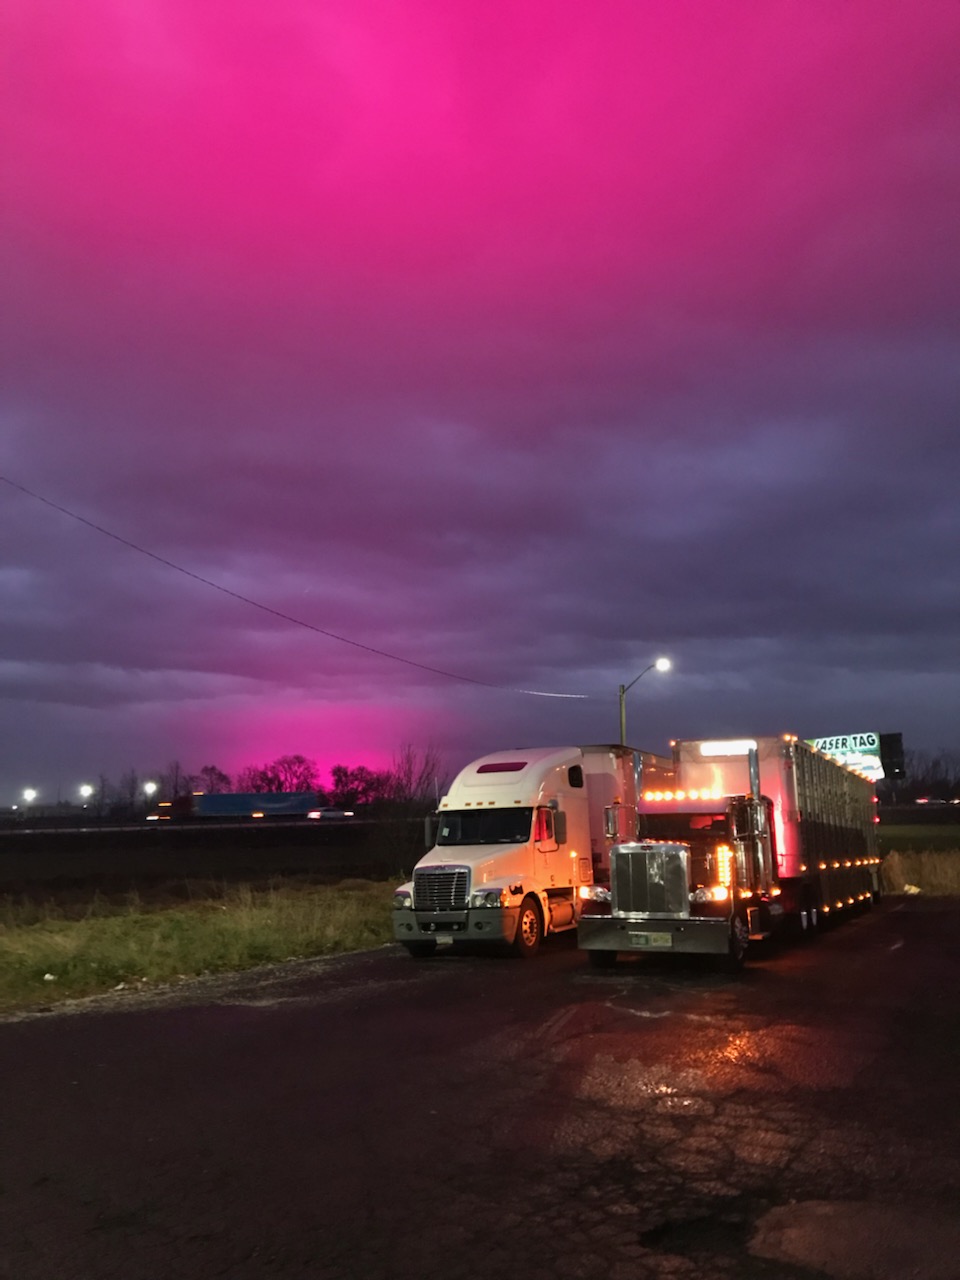 Simply Haulin' truck trip to PA with amazing pink sky